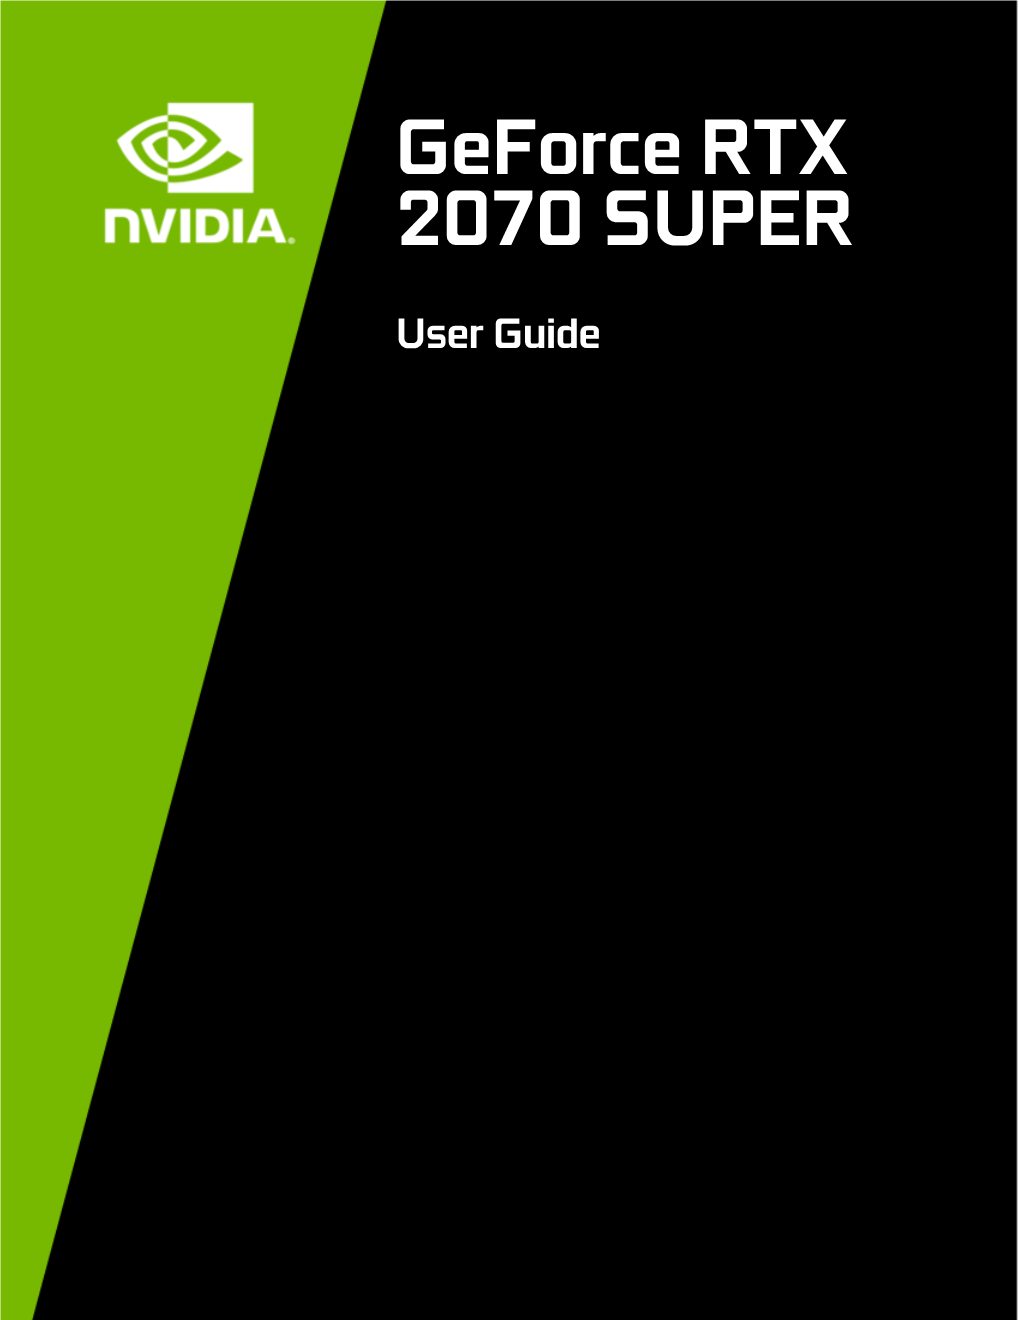 NVIDIA Geforce RTX 2070 SUPER User Guide | 3 Introduction